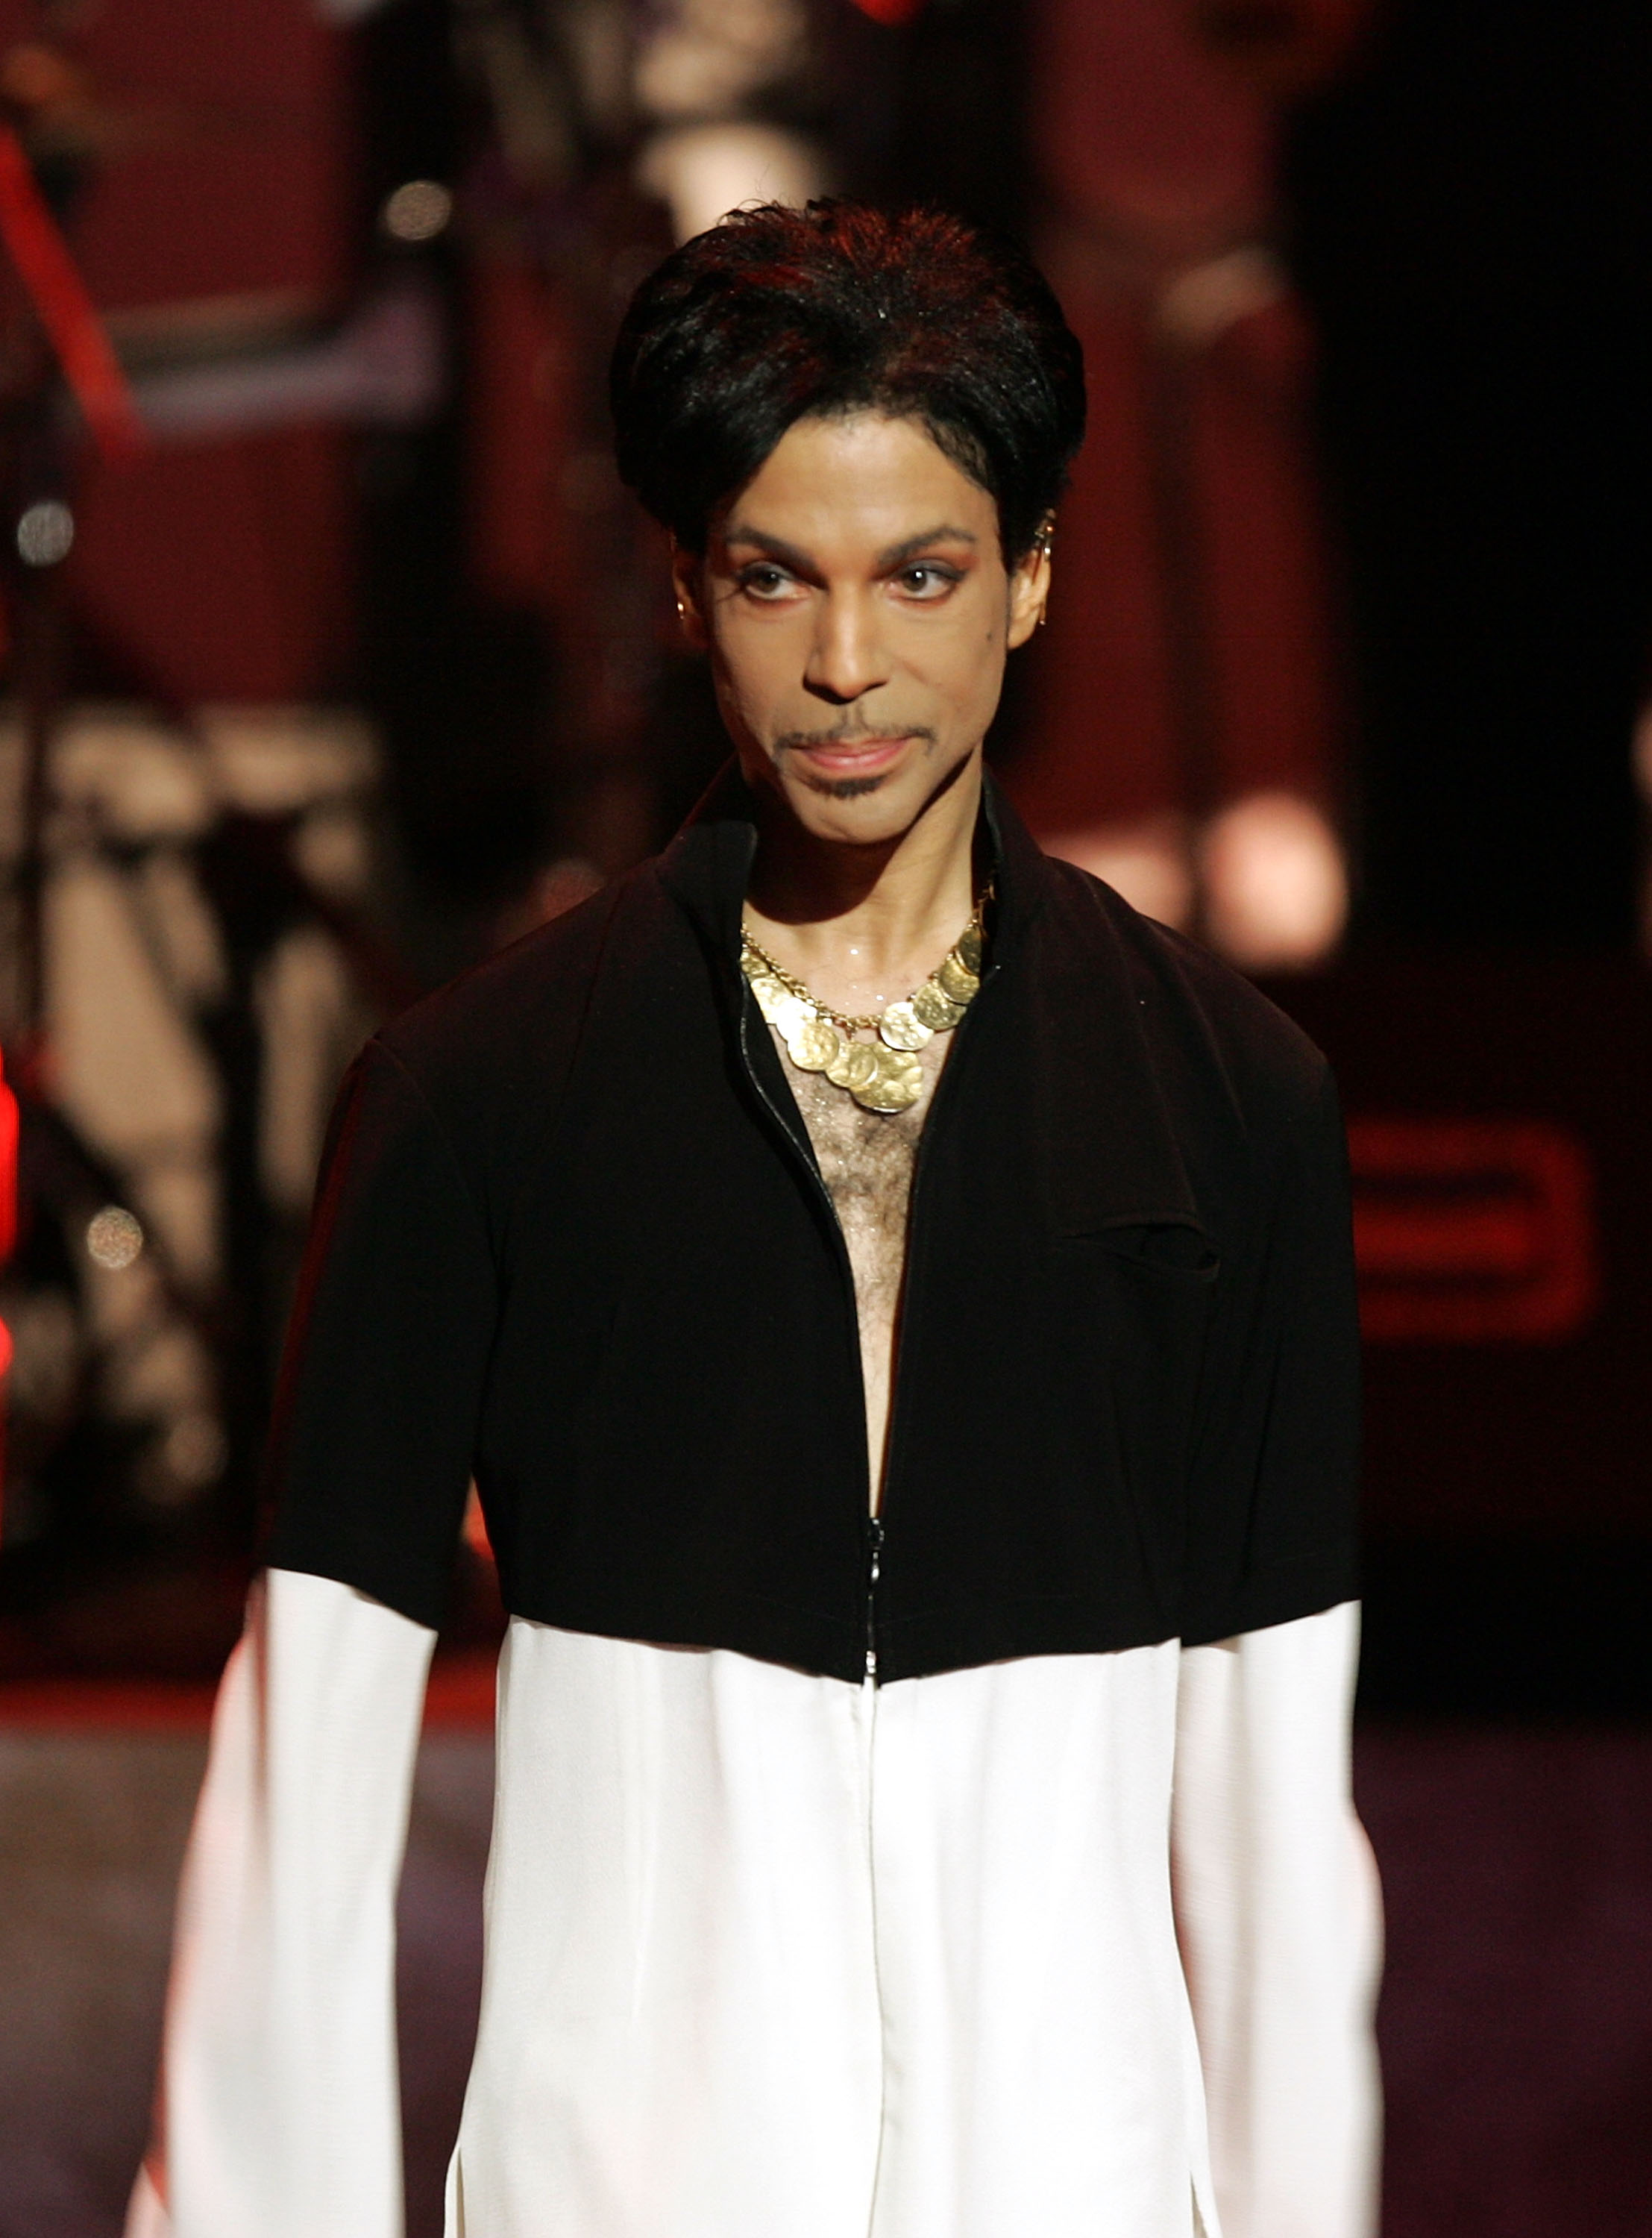 Prince at the 36th NAACP Image Awards in Los Angeles, California on March 19, 2005 | Source: Getty Images